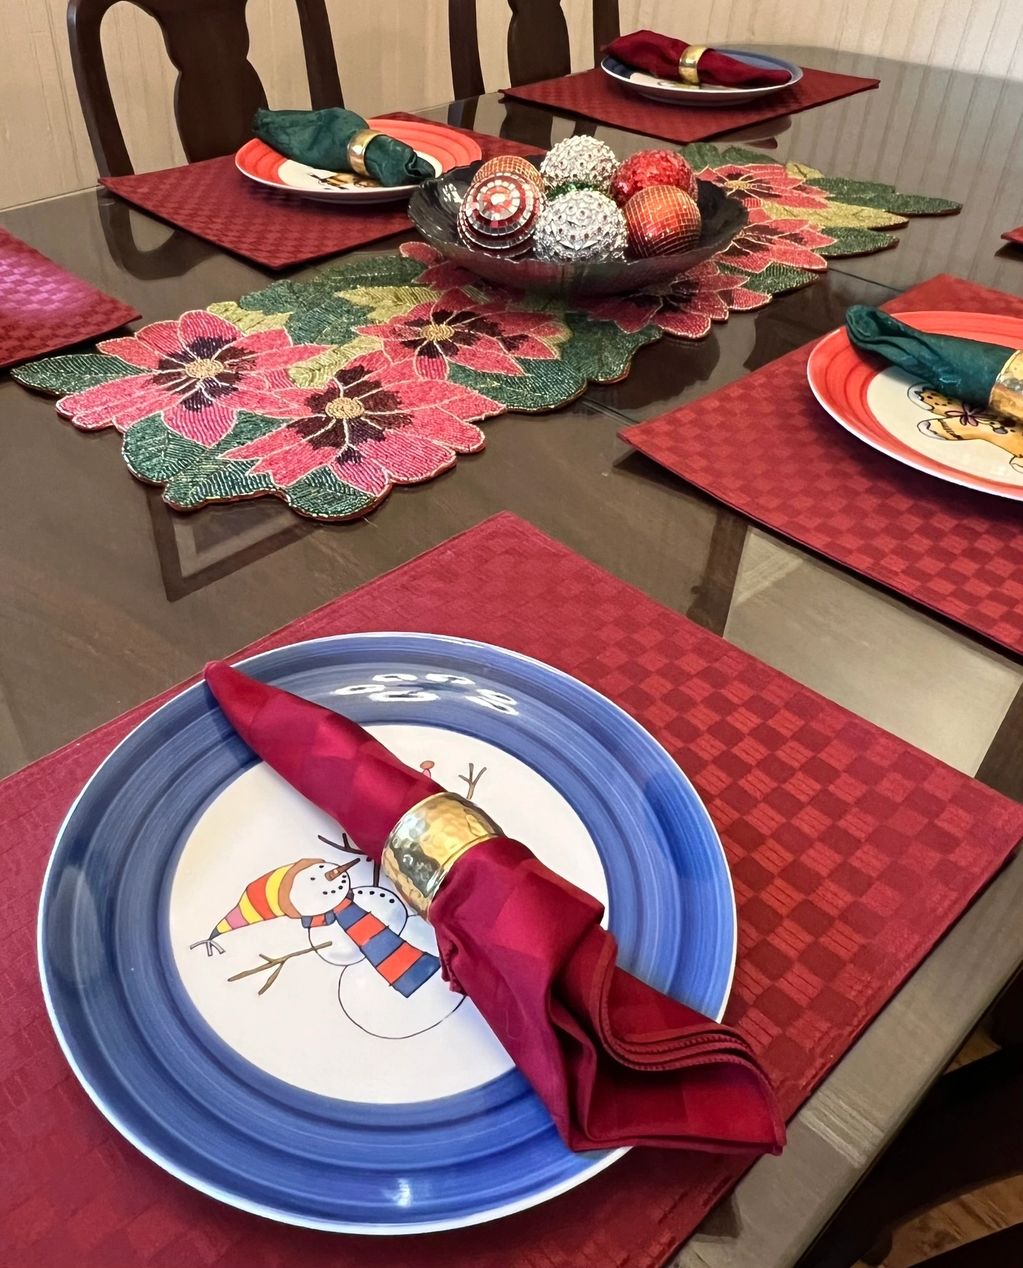 Dining room table with Christmas plates, placemats, and napkins